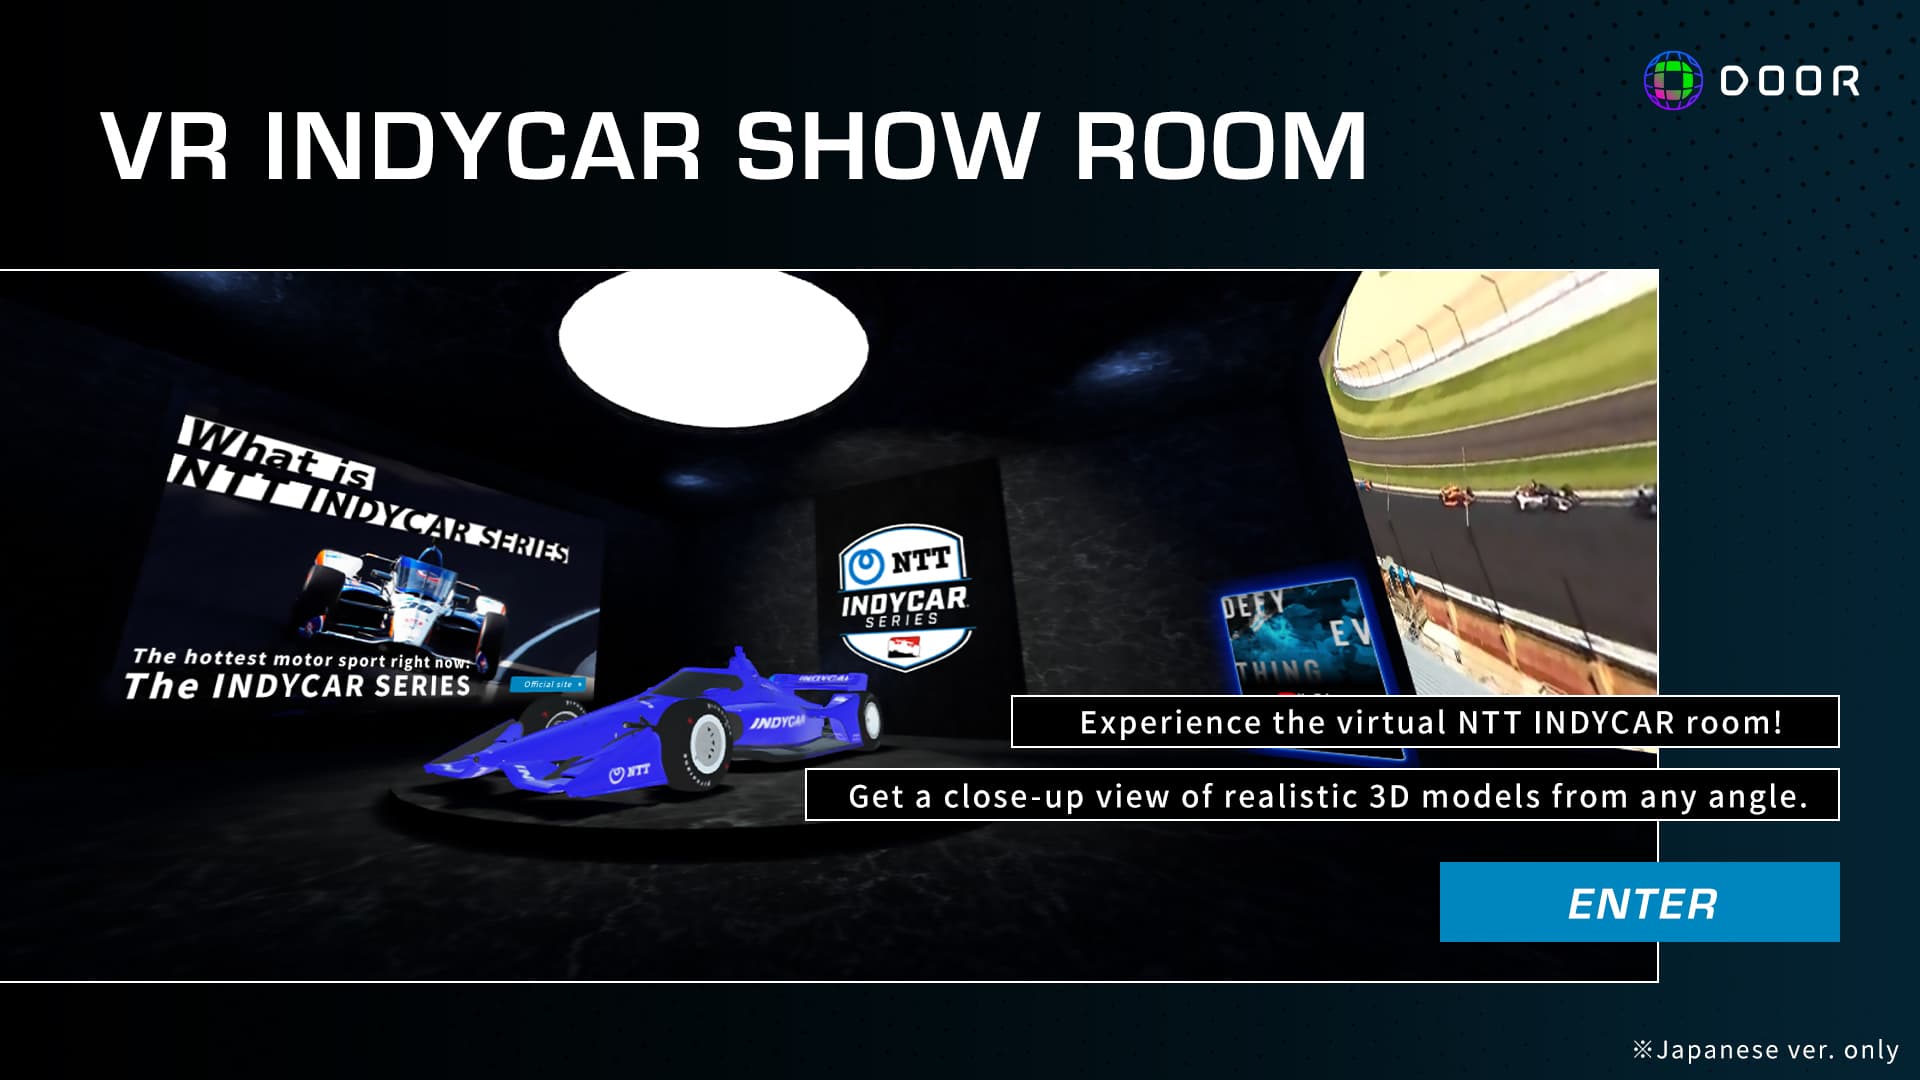 VR INDYCAR SHOW ROOM Experience the virtual NTT INDYCAR room! Get a close-up view of realistic 3D models from any angle.